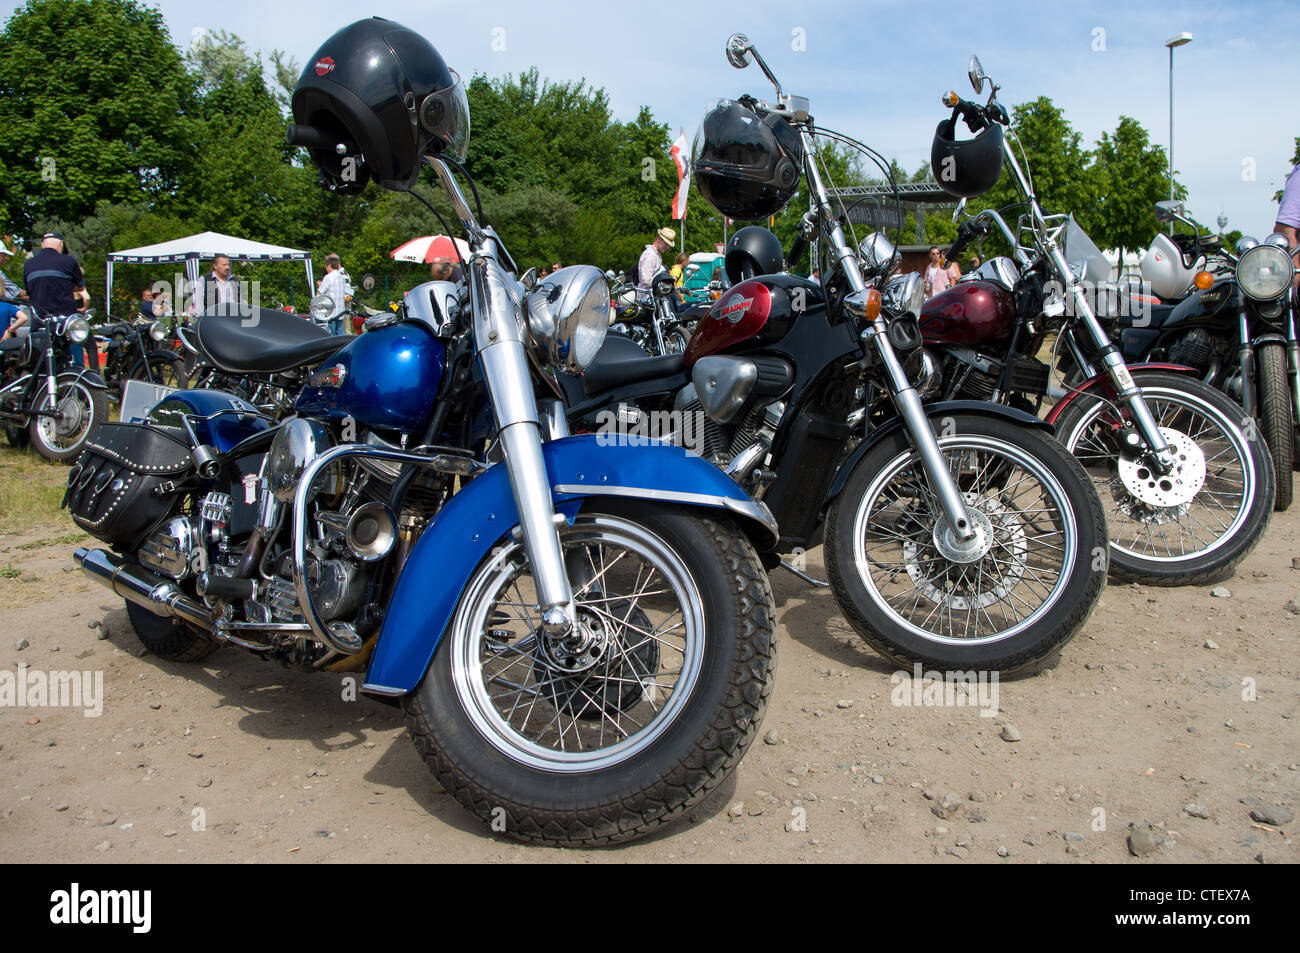 Various motorcycles Harley-Davidson and Honda Shadow in the background Stock Photo